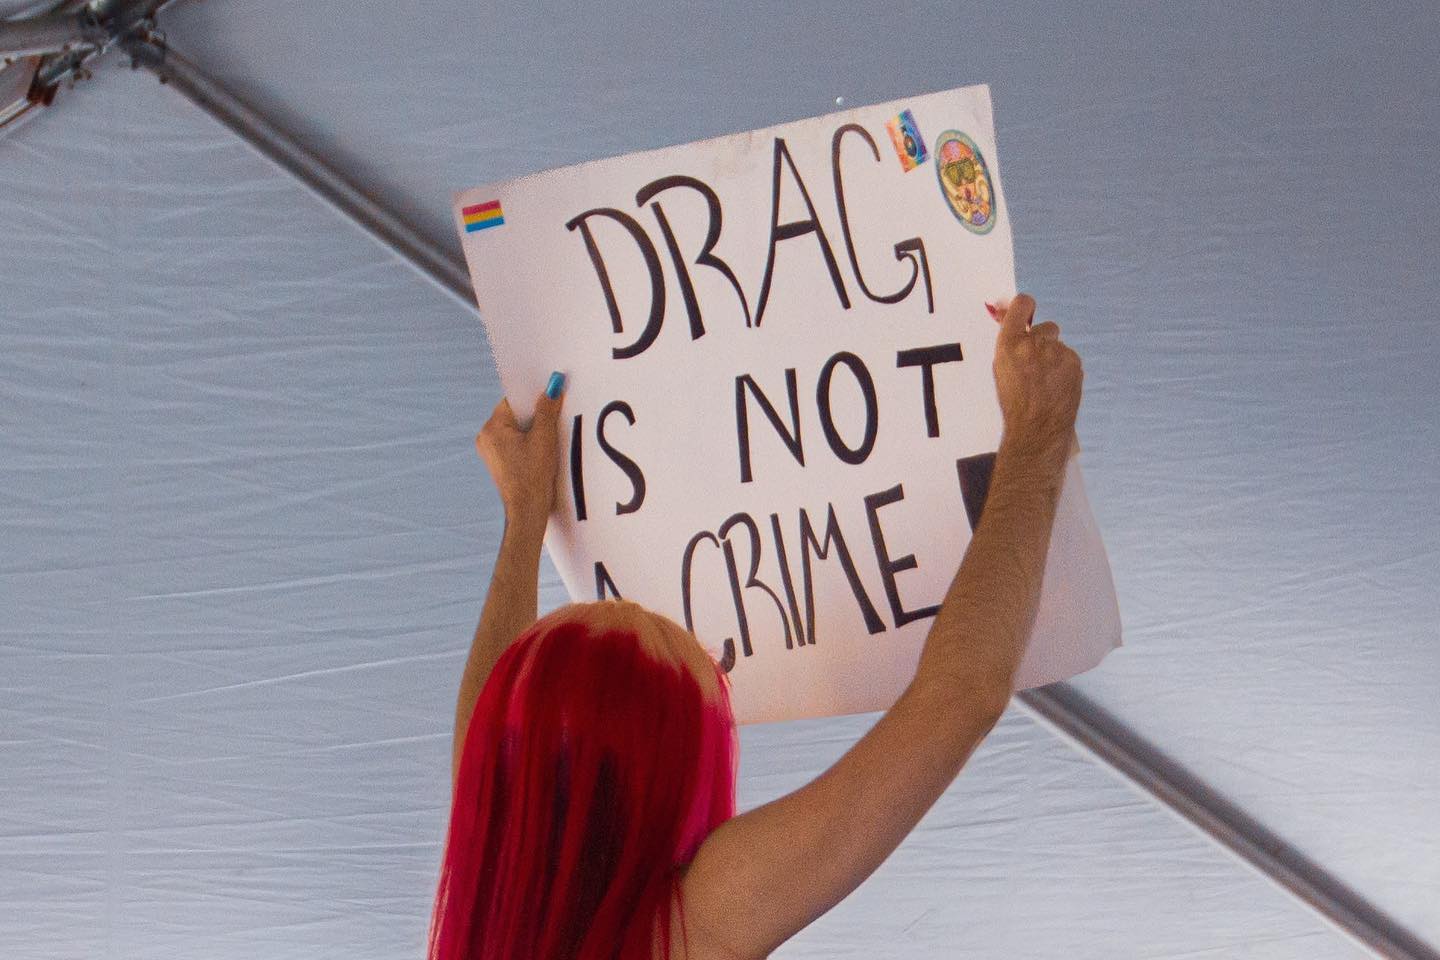 Drag is Not a Crime